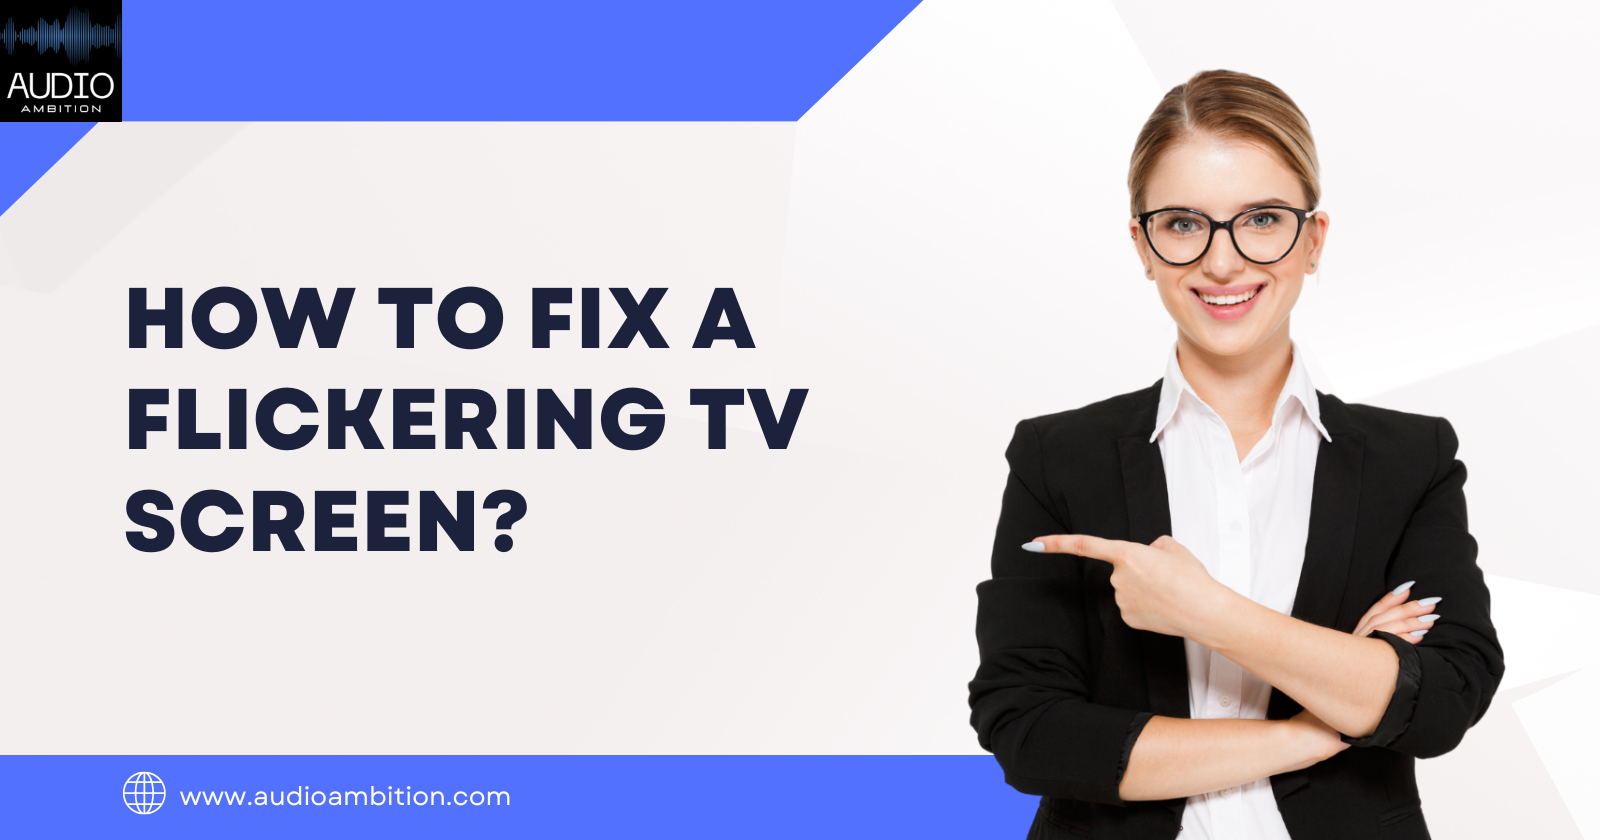 How to Fix a Flickering TV Screen?